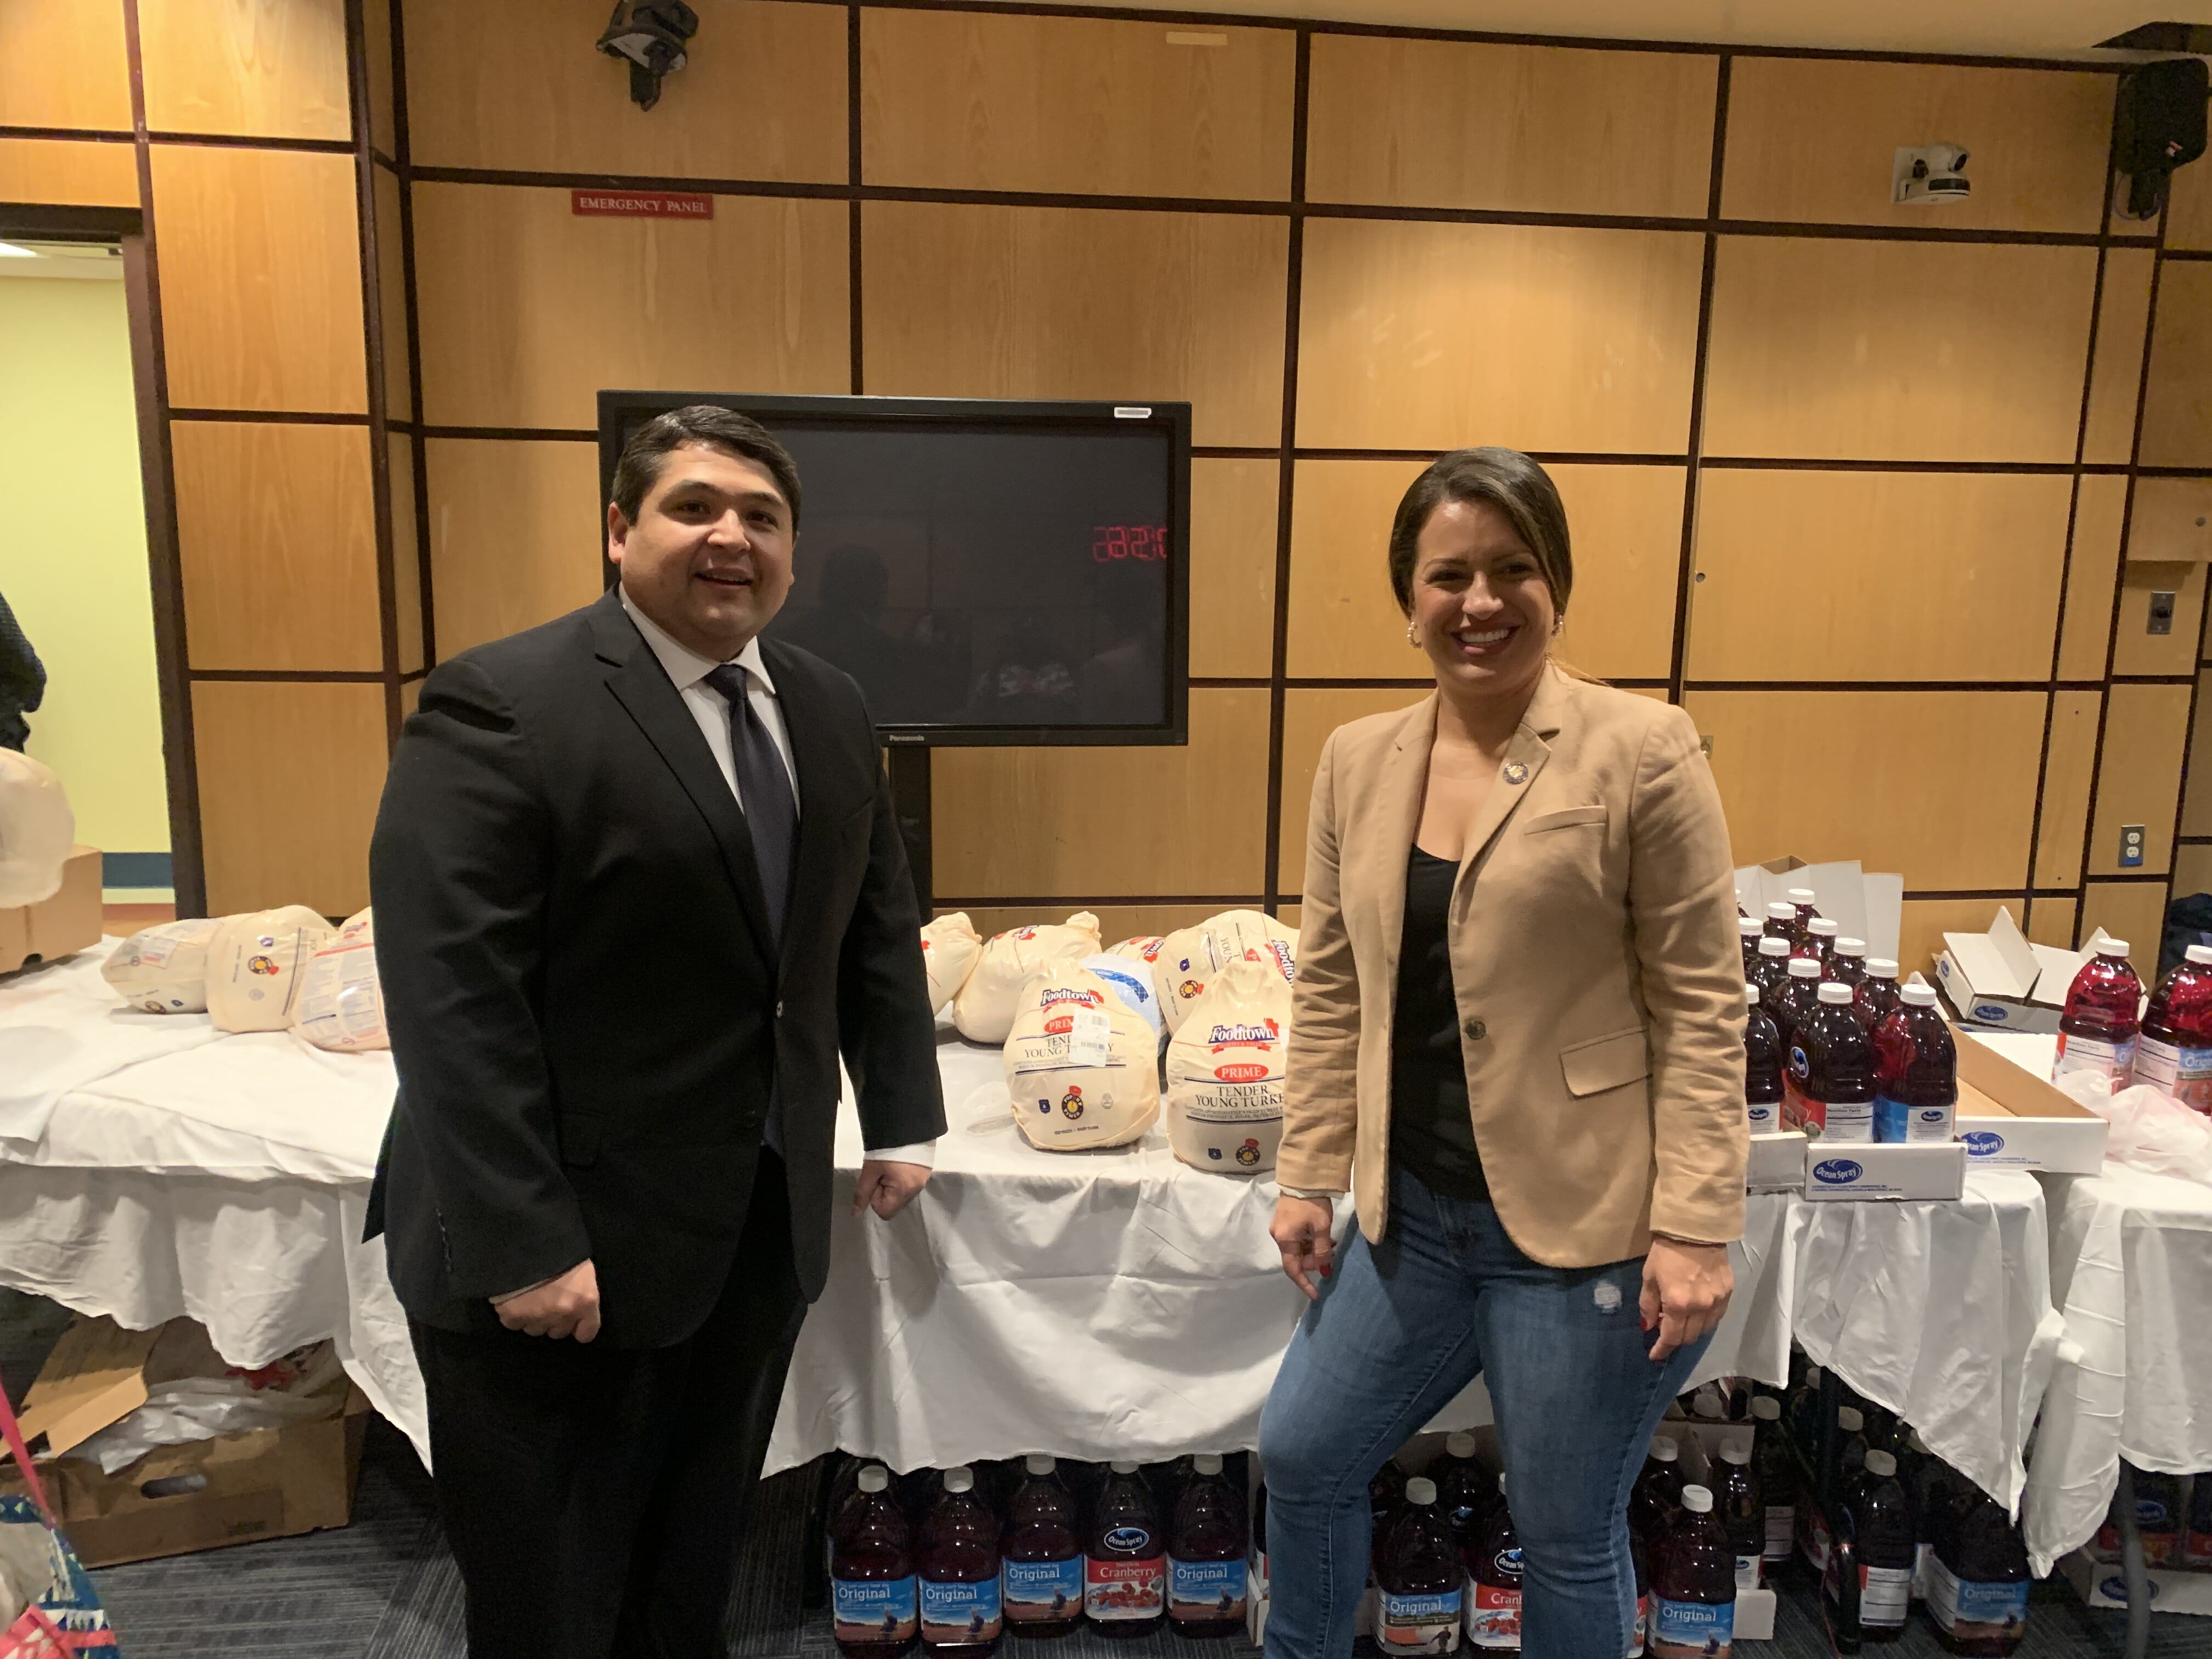 Assemblywoman Cruz working in partnership with Elmhurst Hospital to provide Turkeys and food to families in the district.